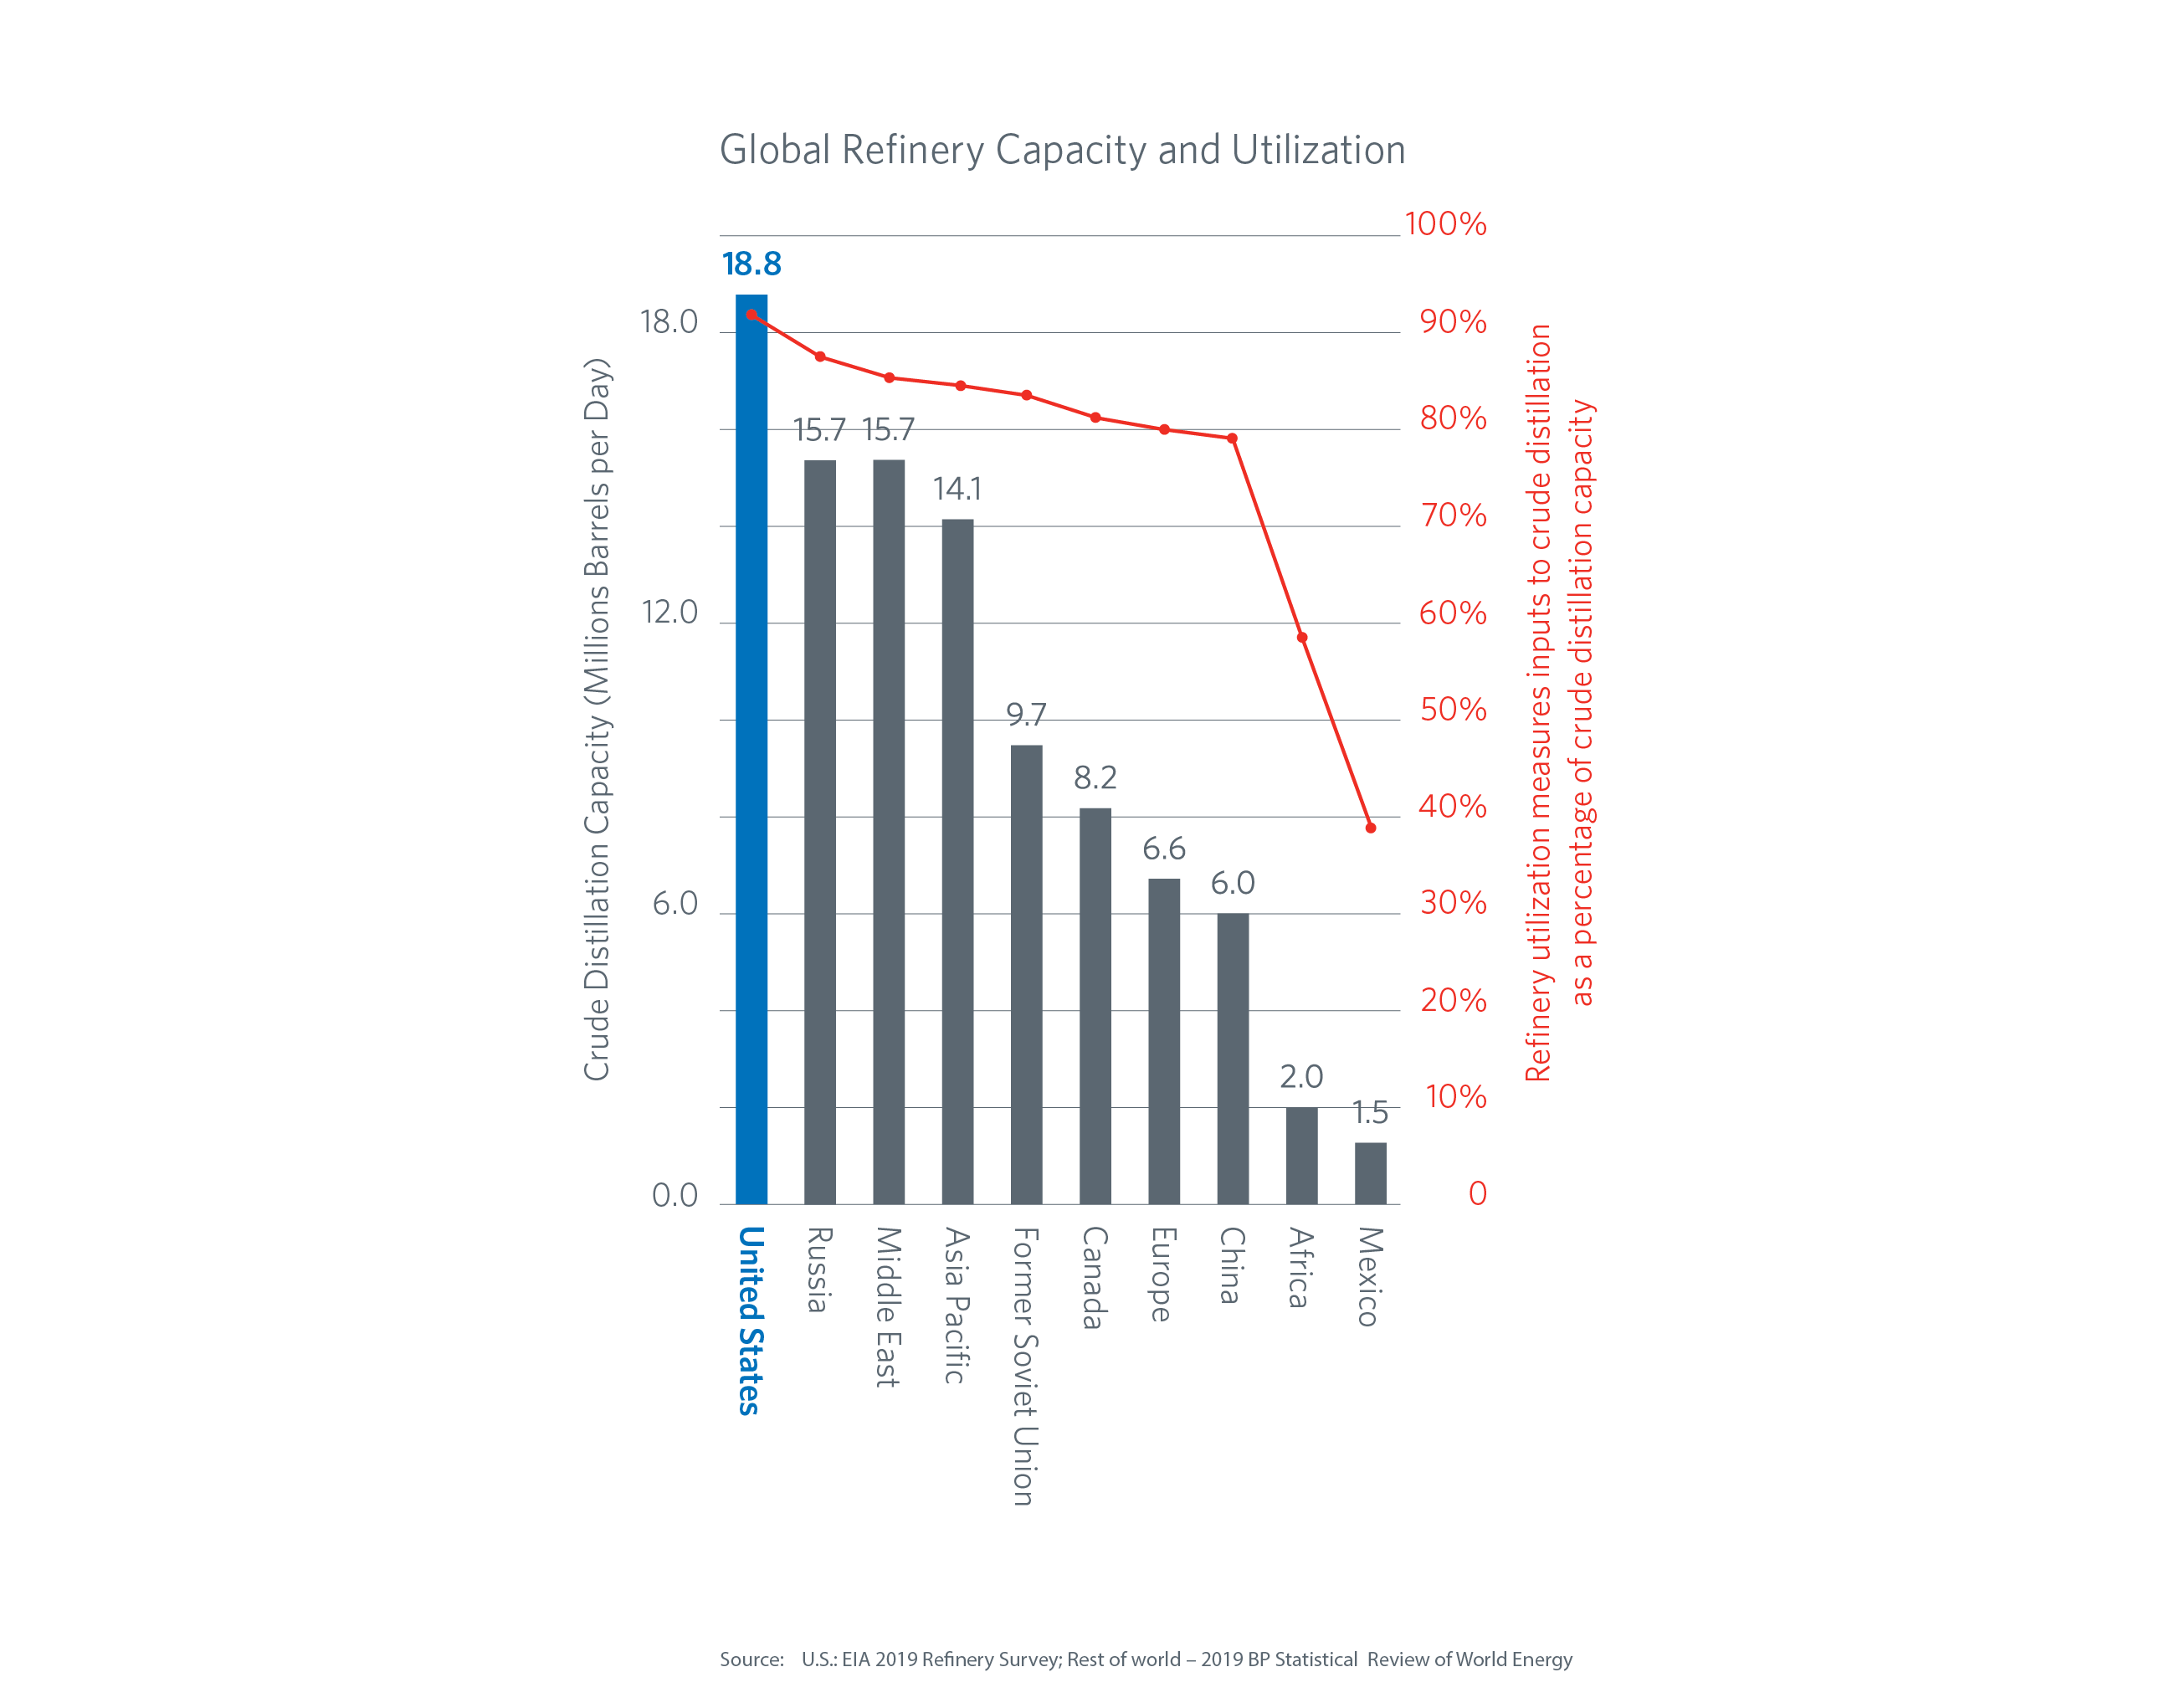 Global refinery capacity and utilization